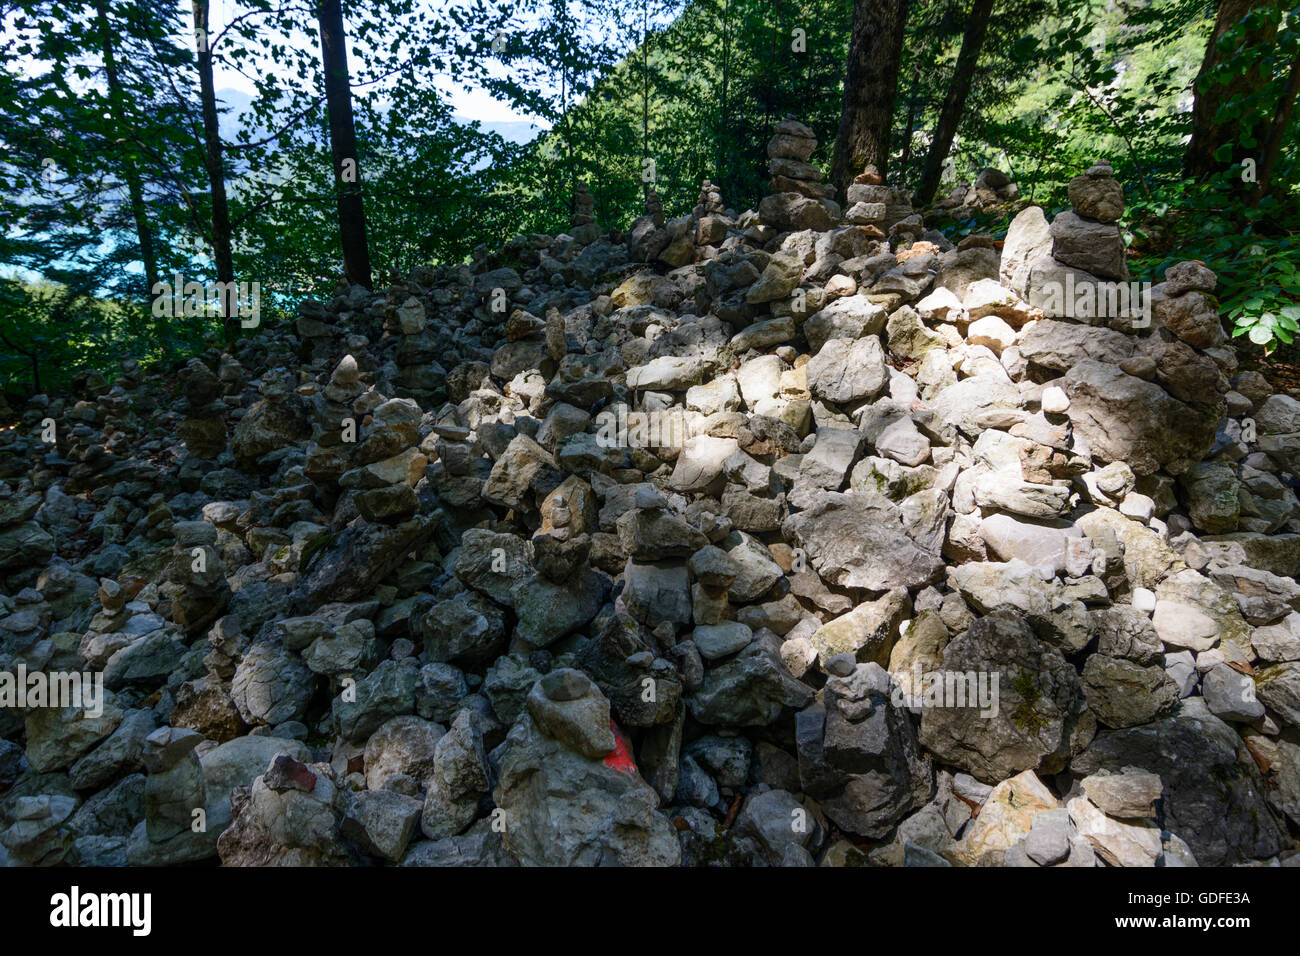 Sankt Gilgen: Cairn at the Chapel of the Cross : stones that were carried up by pilgrims to repentance from the Valley, Austria, Stock Photo